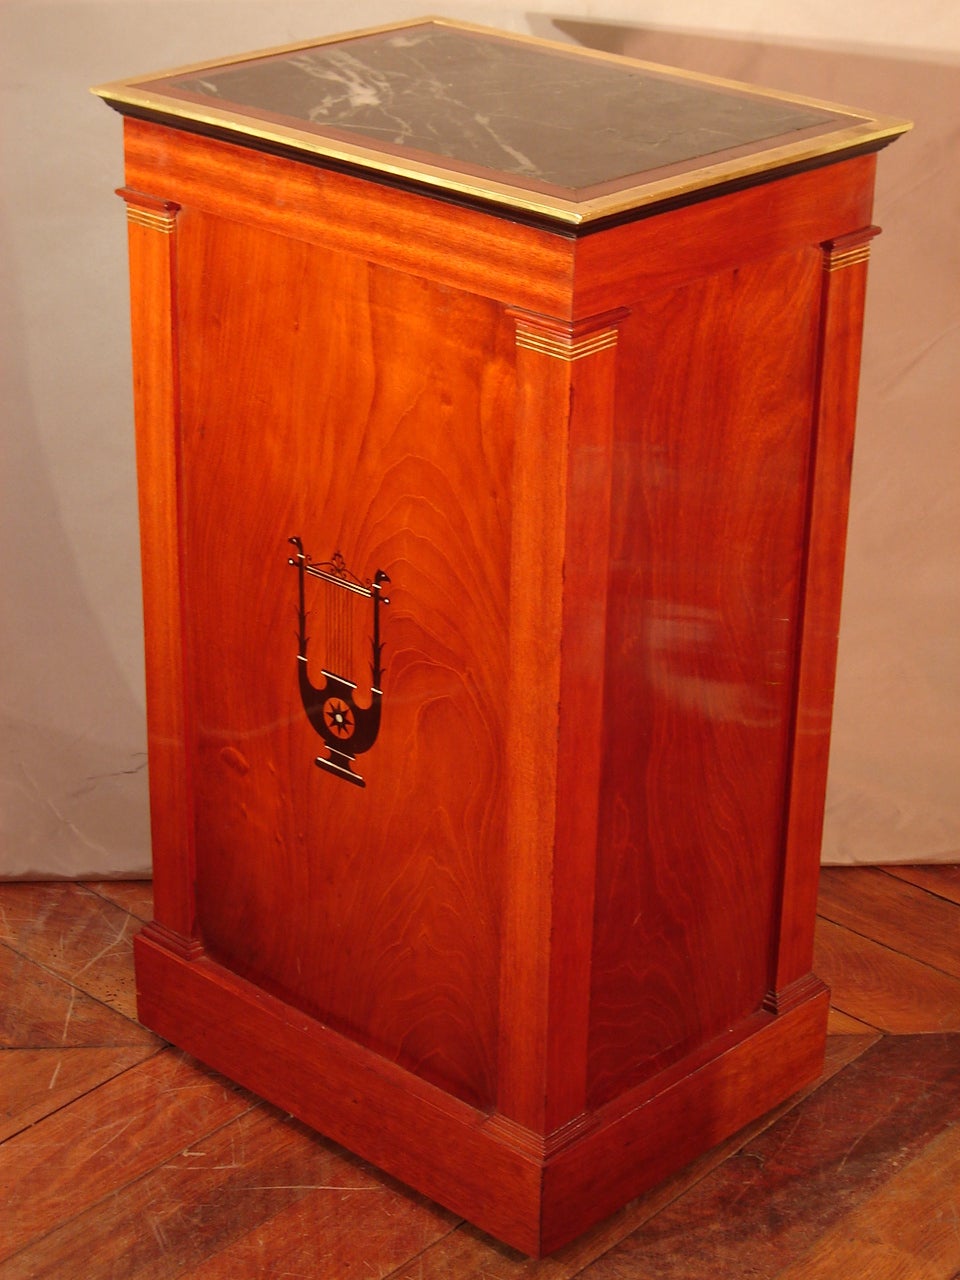 Exceptional somno in mahogany and mahogany veneer from the early 19th  Century Empire period, stamped Marcion (1769-1840), with a wood curtain opening on the top and a door on the bottom, ebony marquetry representing a lyre with an eagle's head on